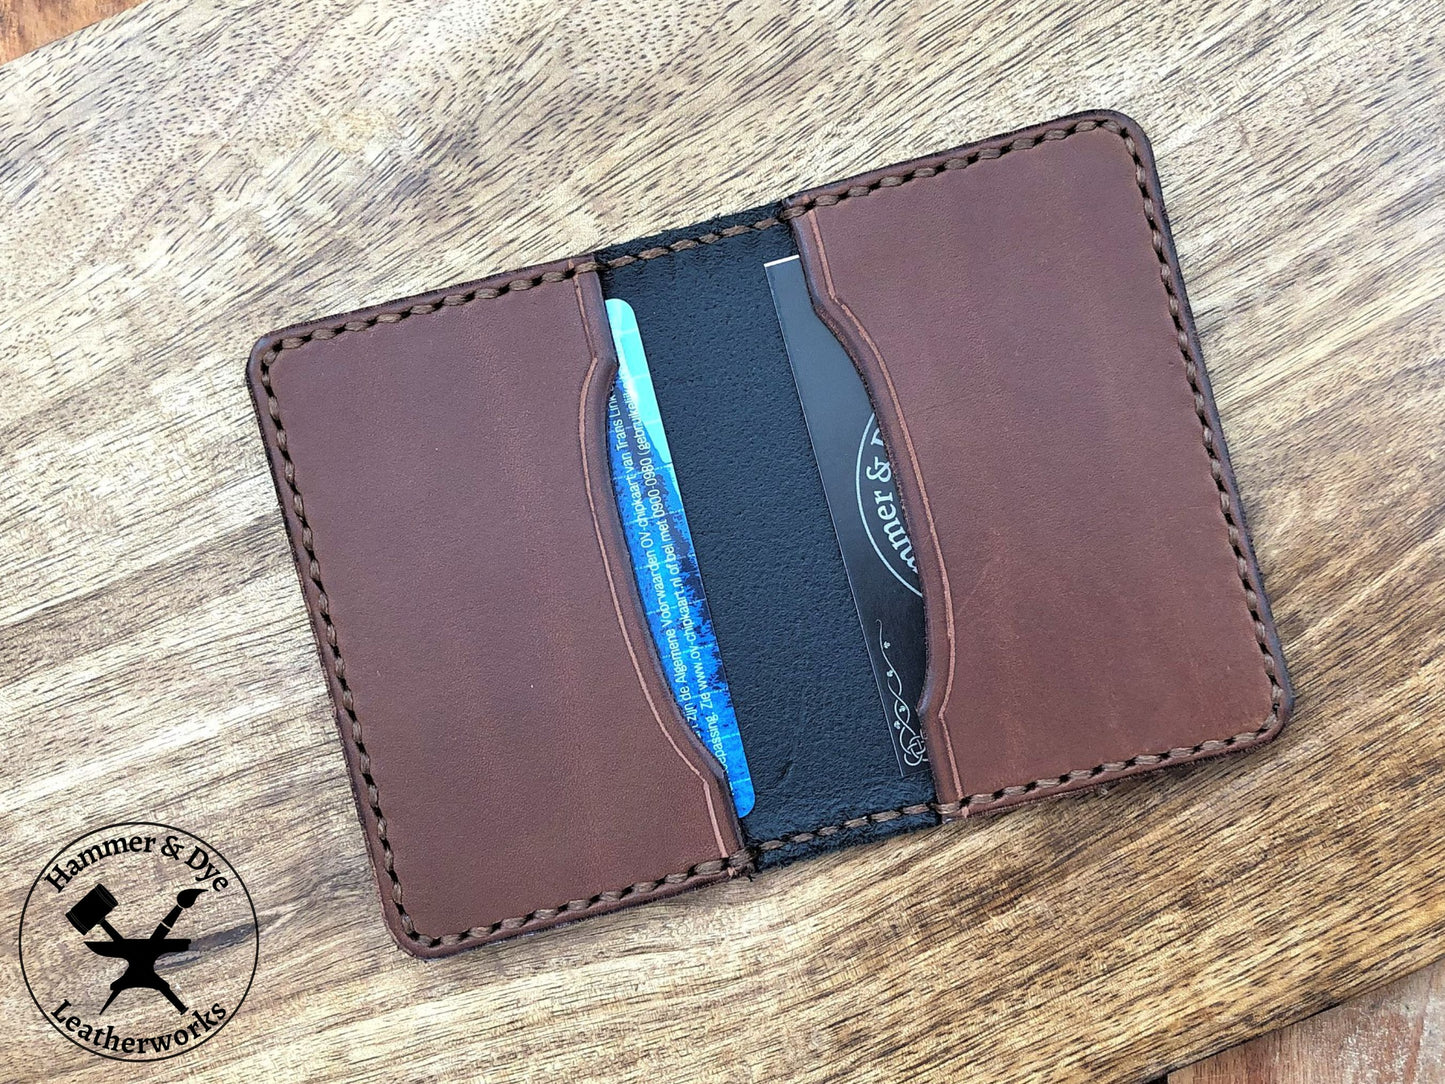 Handmade Two-tone Bifold Leather Card Wallet in Black and Brown with brown stitching with cards